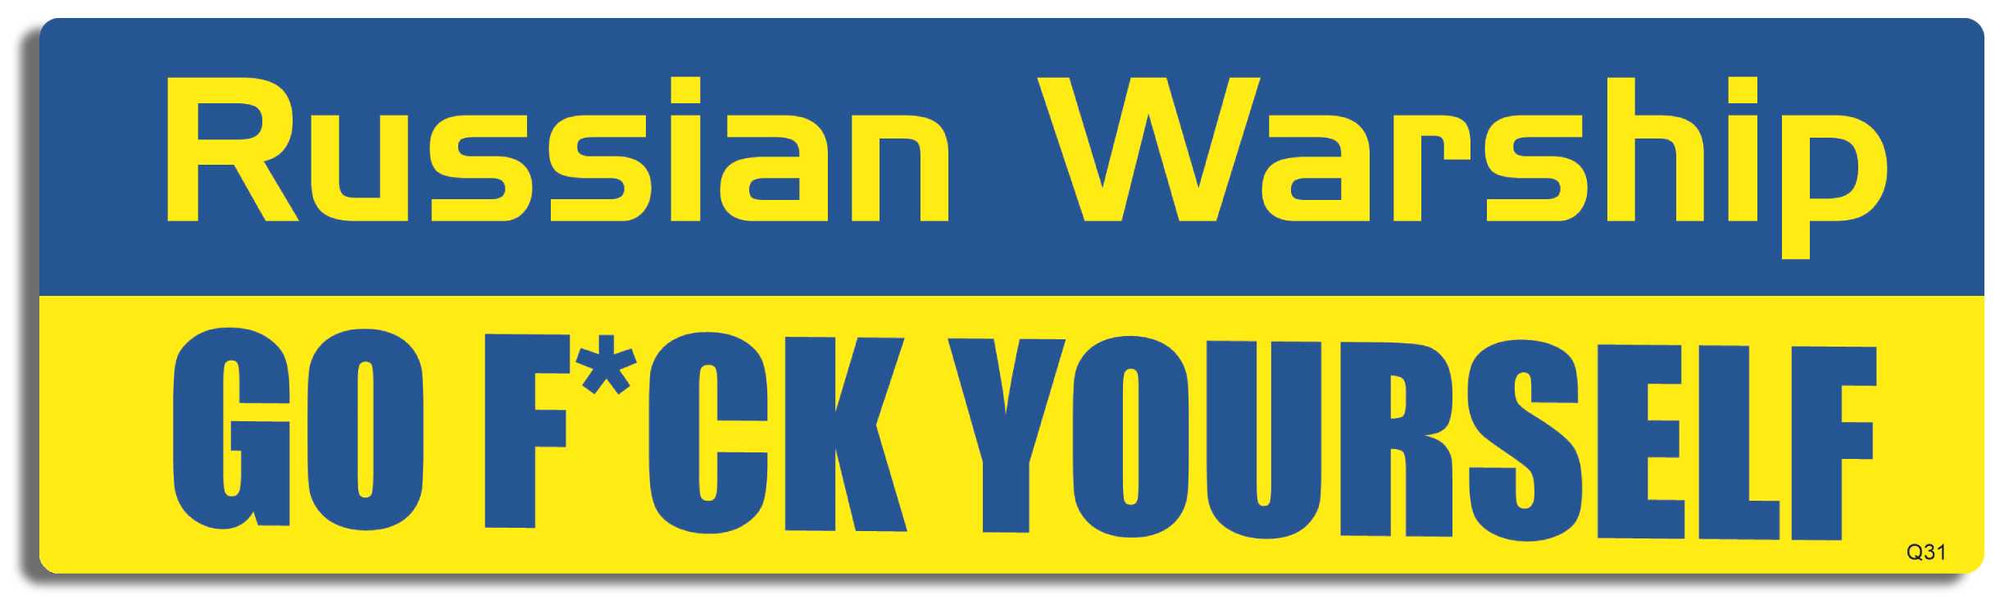 Russian Warship, Go F*CK Yourself - 3" x 10" -  Decal Bumper Sticker-quotation Bumper Sticker Car Magnet Russian Warship, Go F*CK Yourself-  Decal for carsquotation, quote